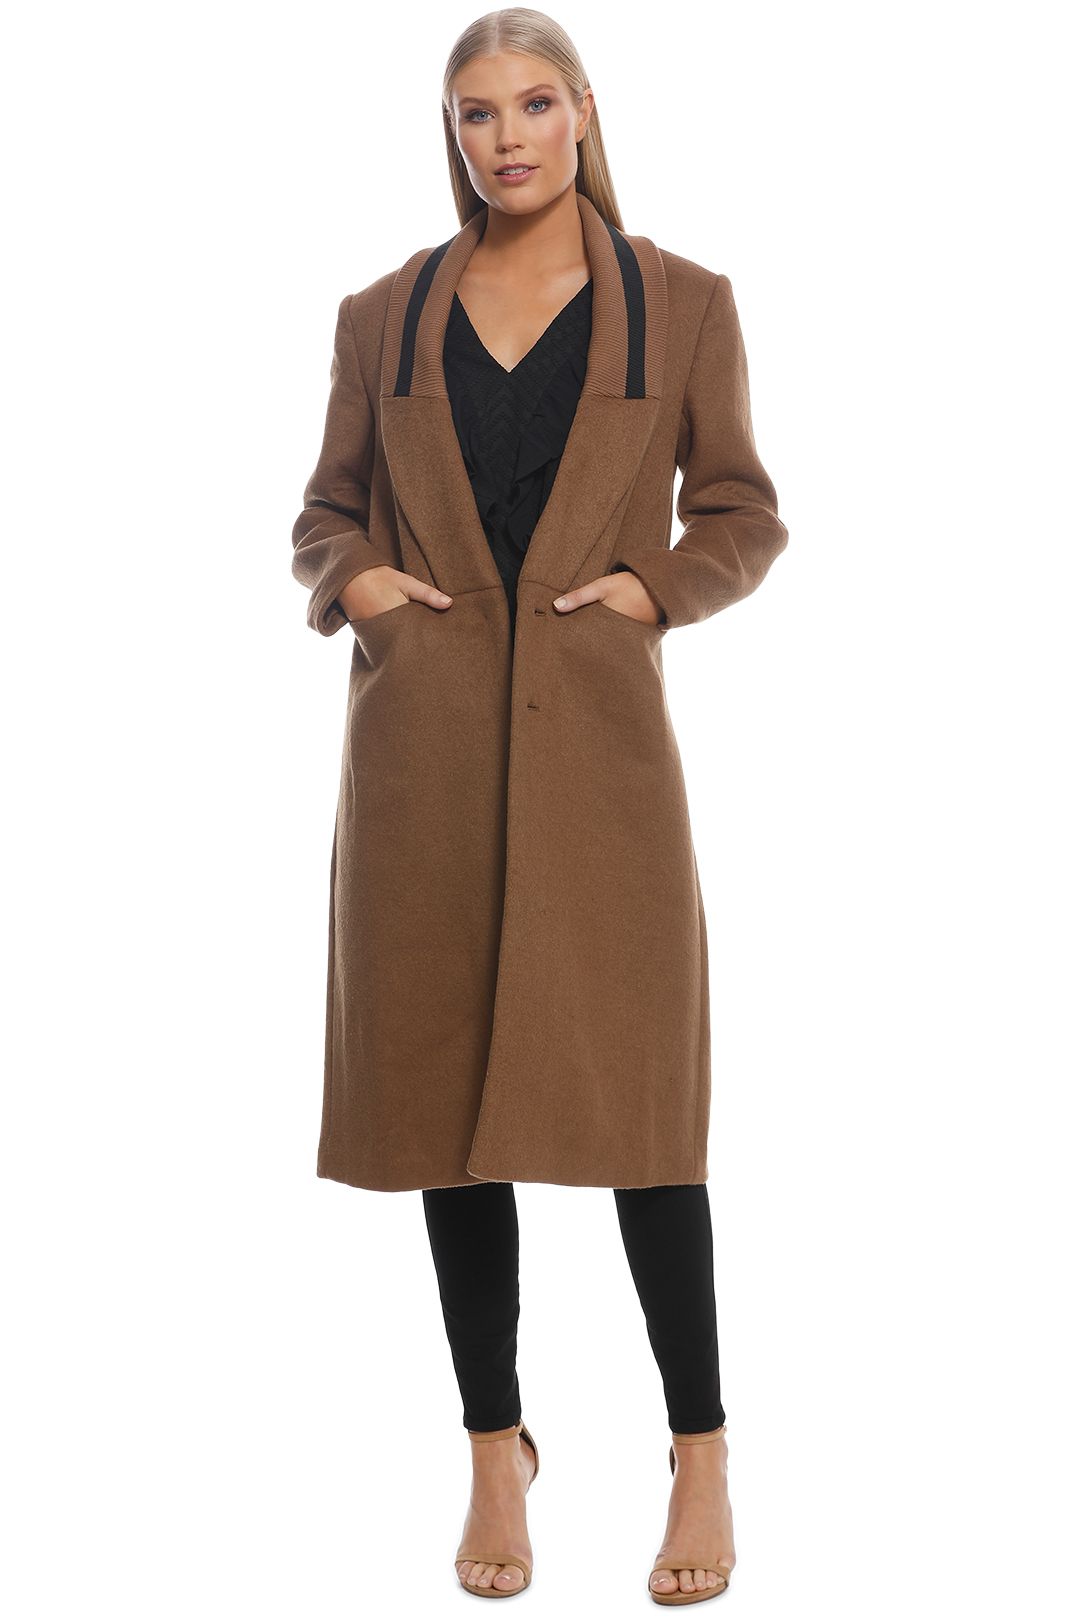 CMEO Collective - Duality Coat - Tan - Front